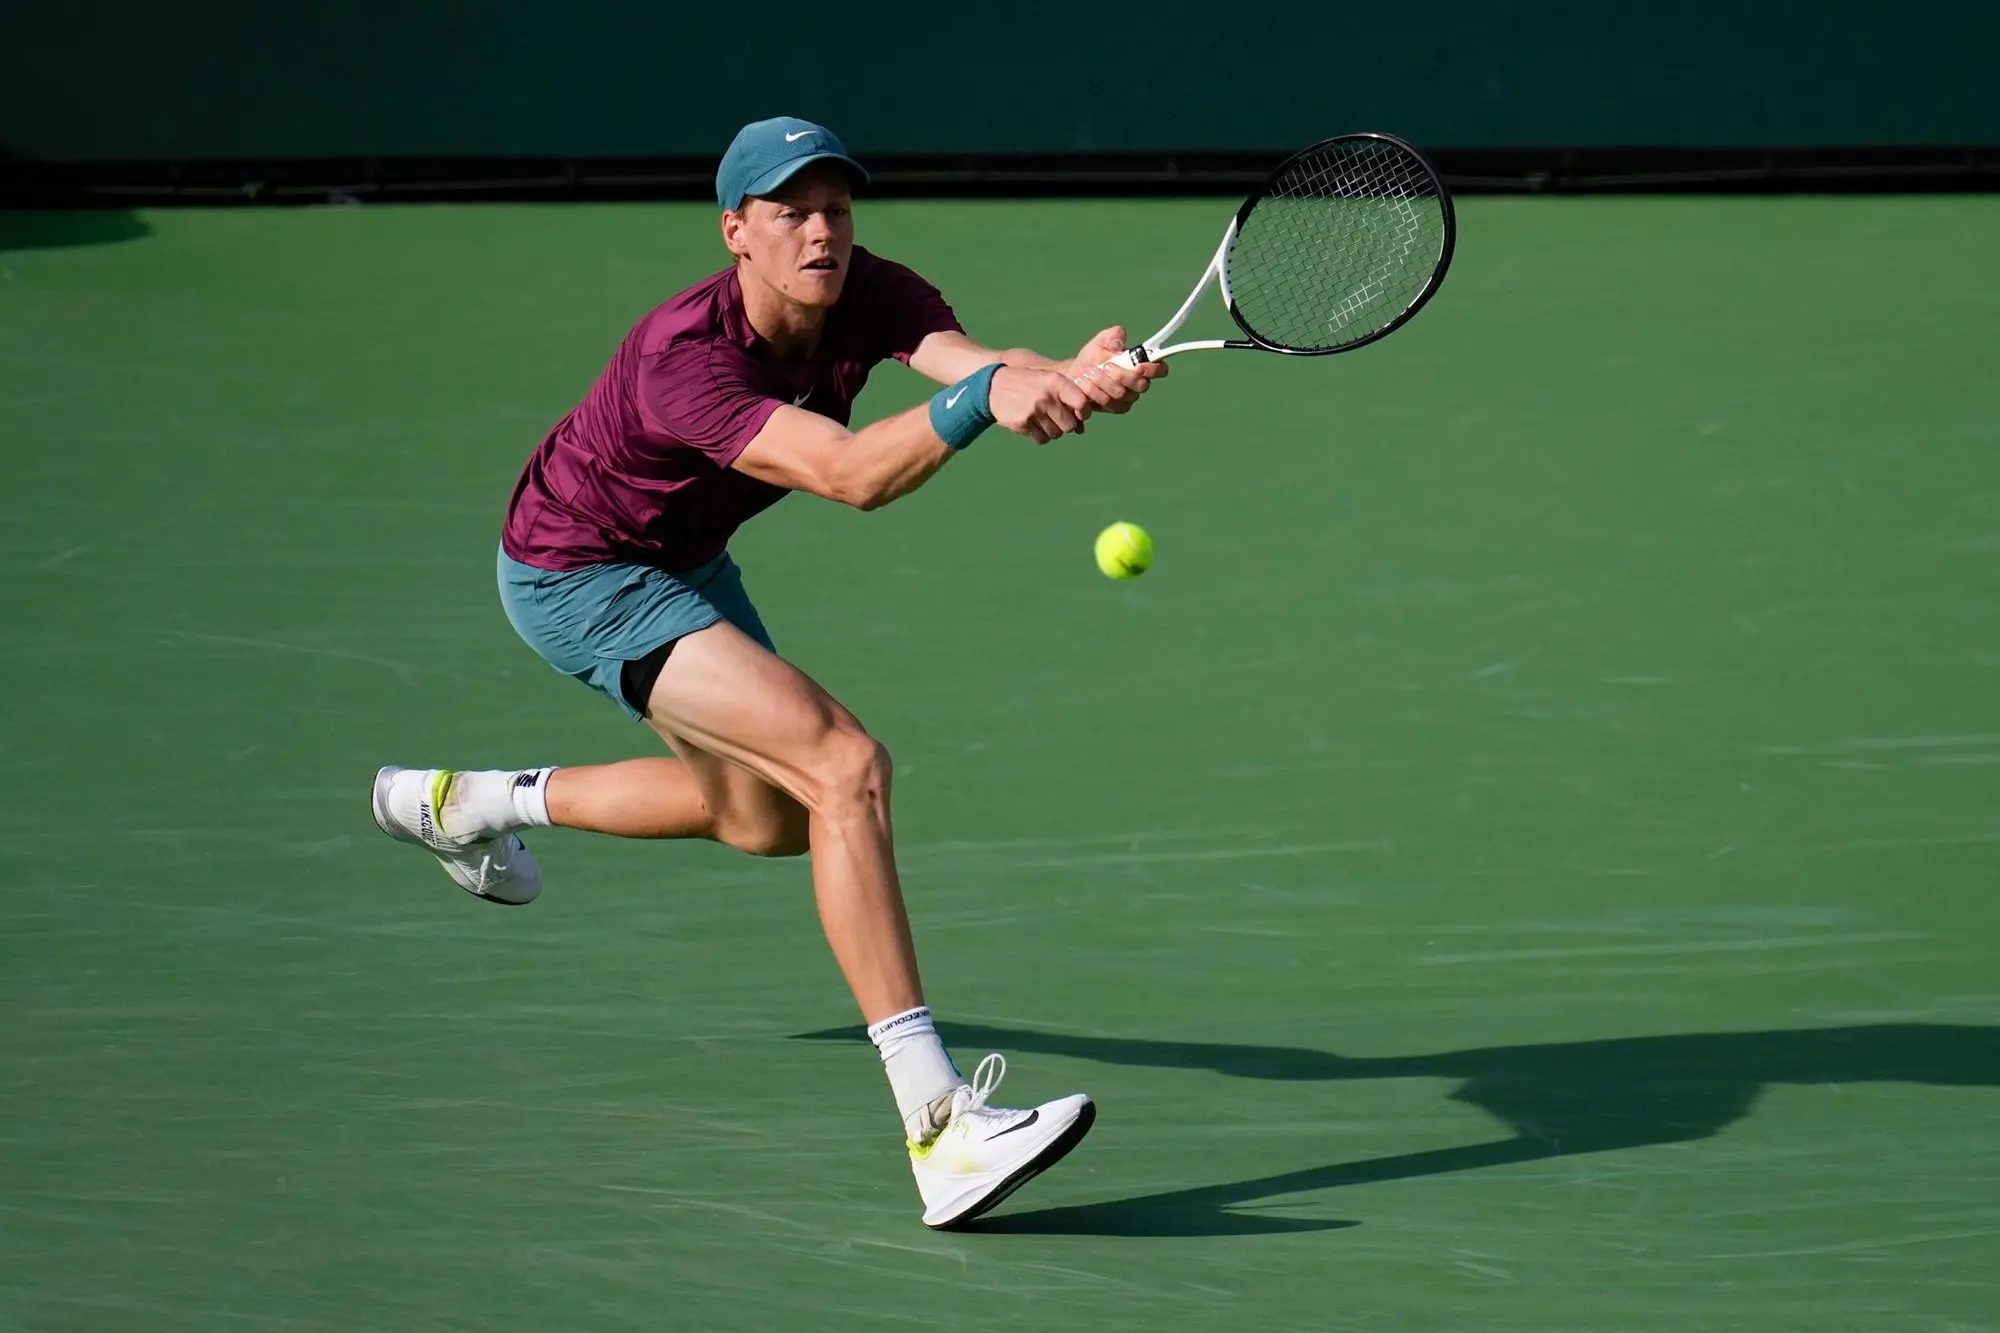 epa10531231 Jannik Sinner of Italy in action against Carlos Alcaraz of Spain during the men's semifinal round of the BNP Paribas Open tennis tournament at the Indian Wells Tennis Garden in Indian Wells, California, USA, 18 March 2023. EPA/RAY ACEVEDO